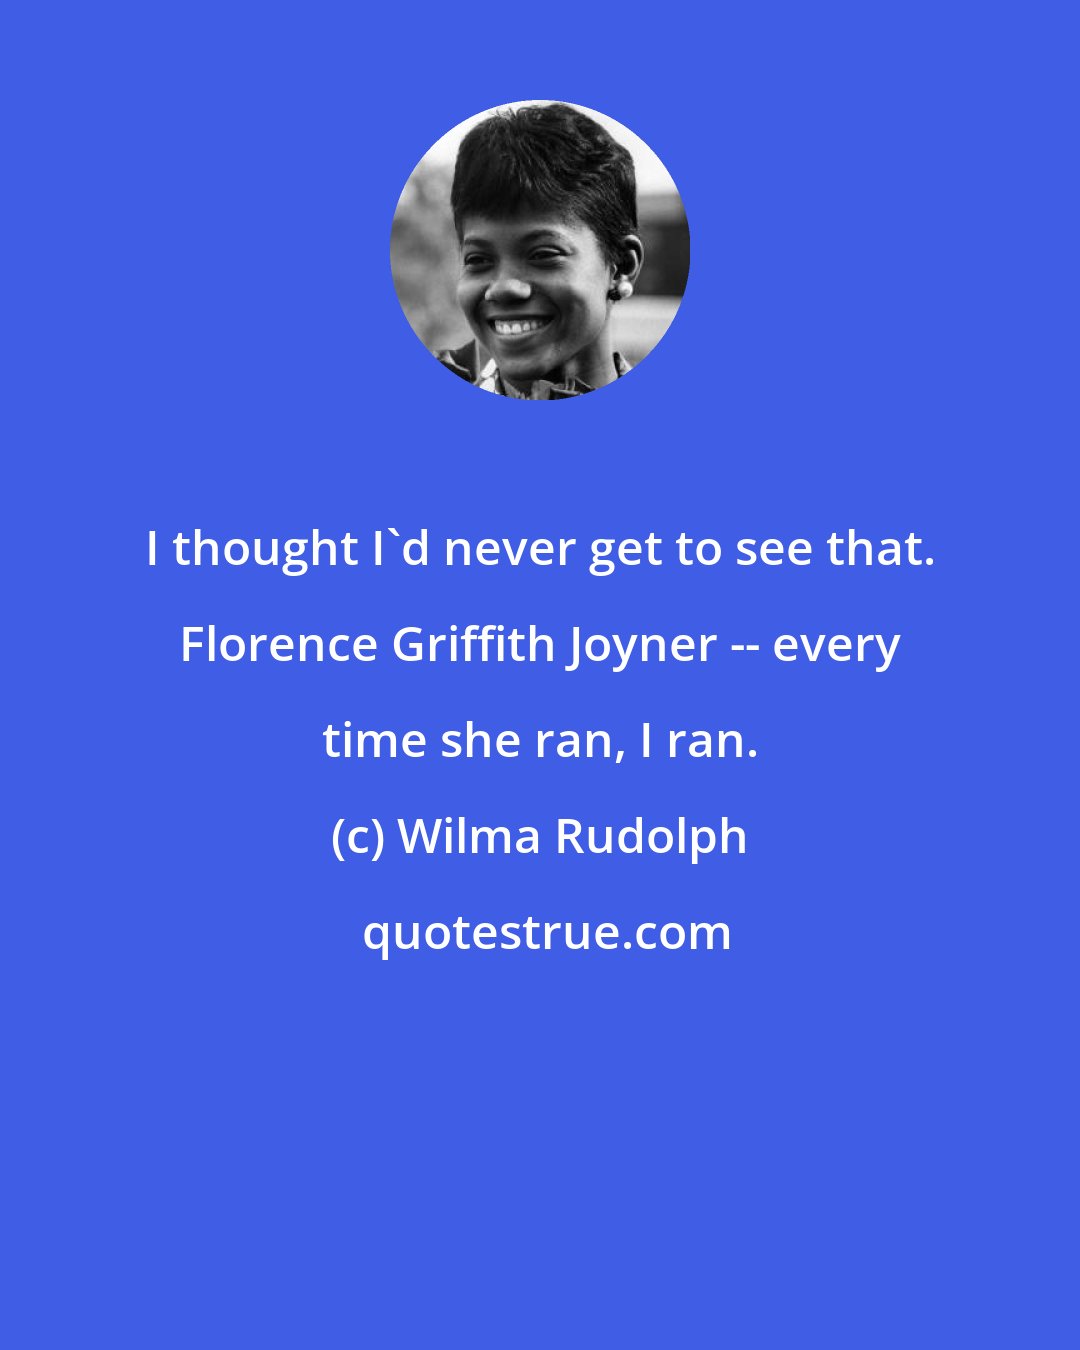 Wilma Rudolph: I thought I'd never get to see that. Florence Griffith Joyner -- every time she ran, I ran.